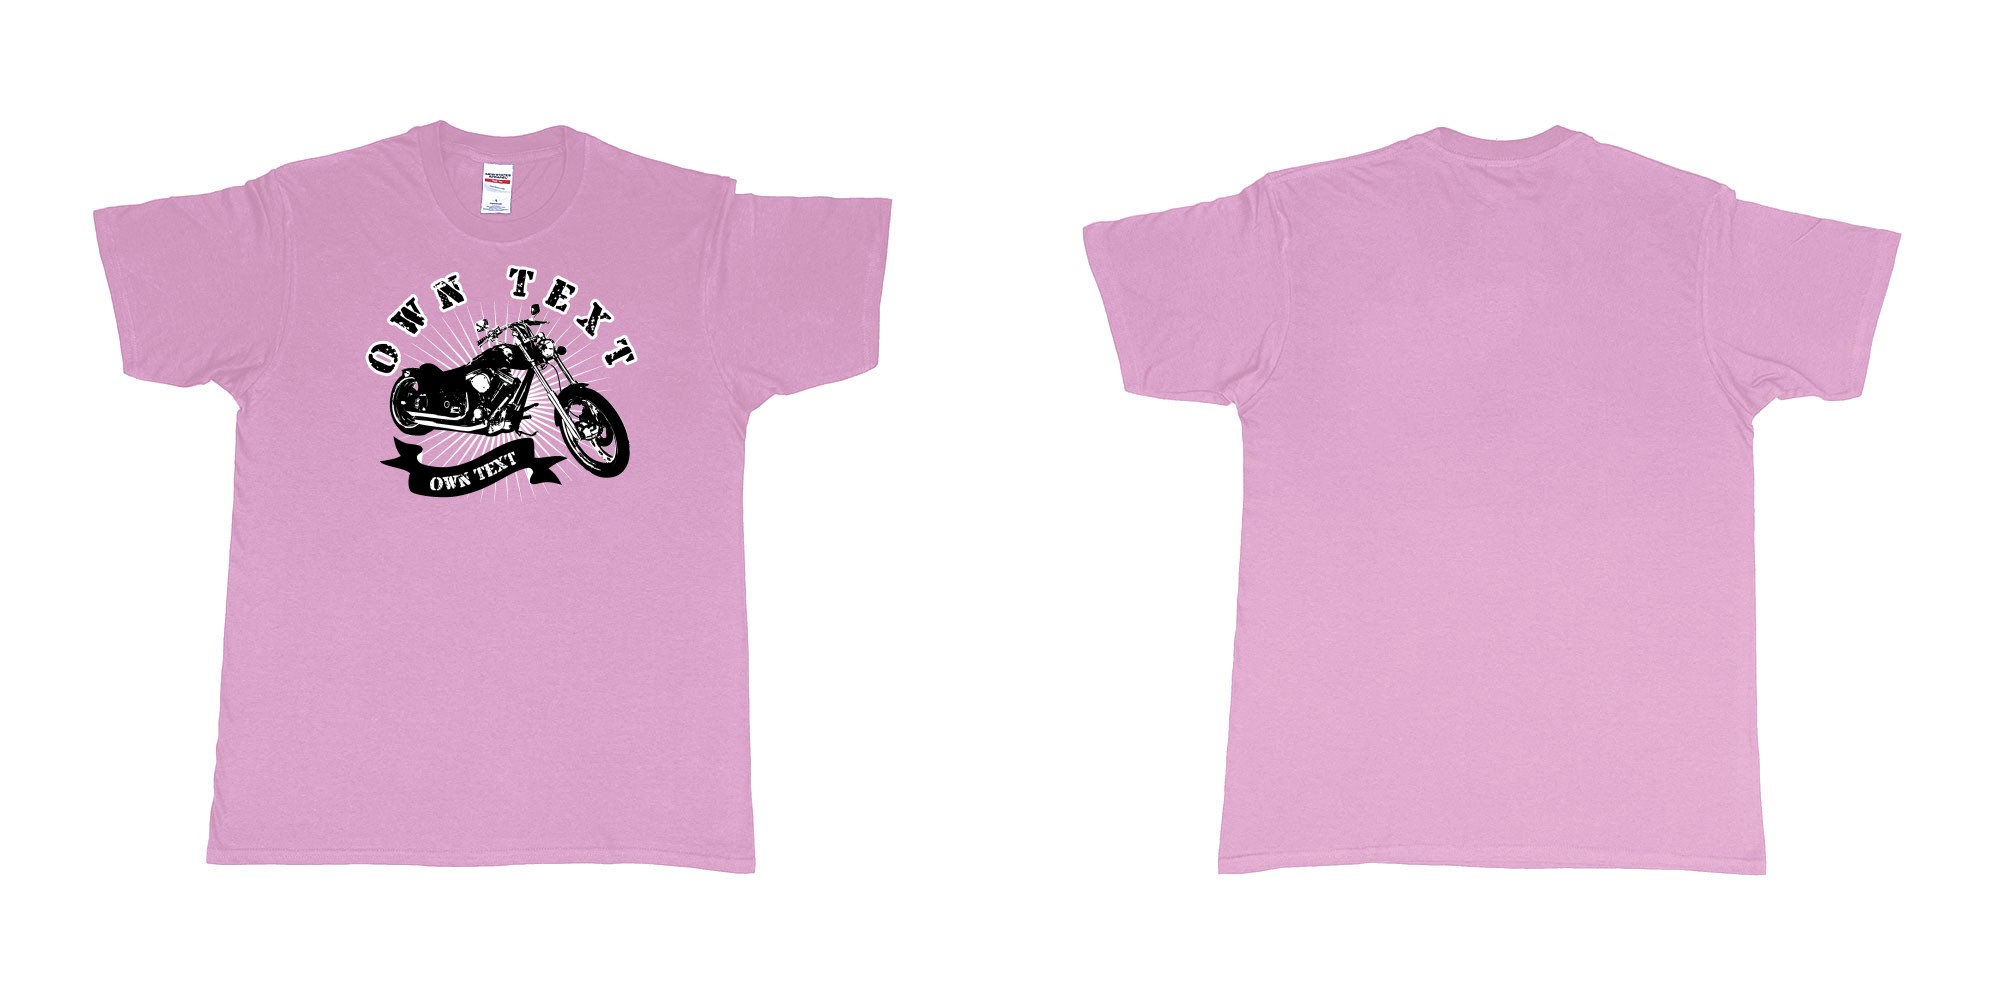 Custom tshirt design chopper motorcycle with your personalized own text printing in bali in fabric color light-pink choice your own text made in Bali by The Pirate Way